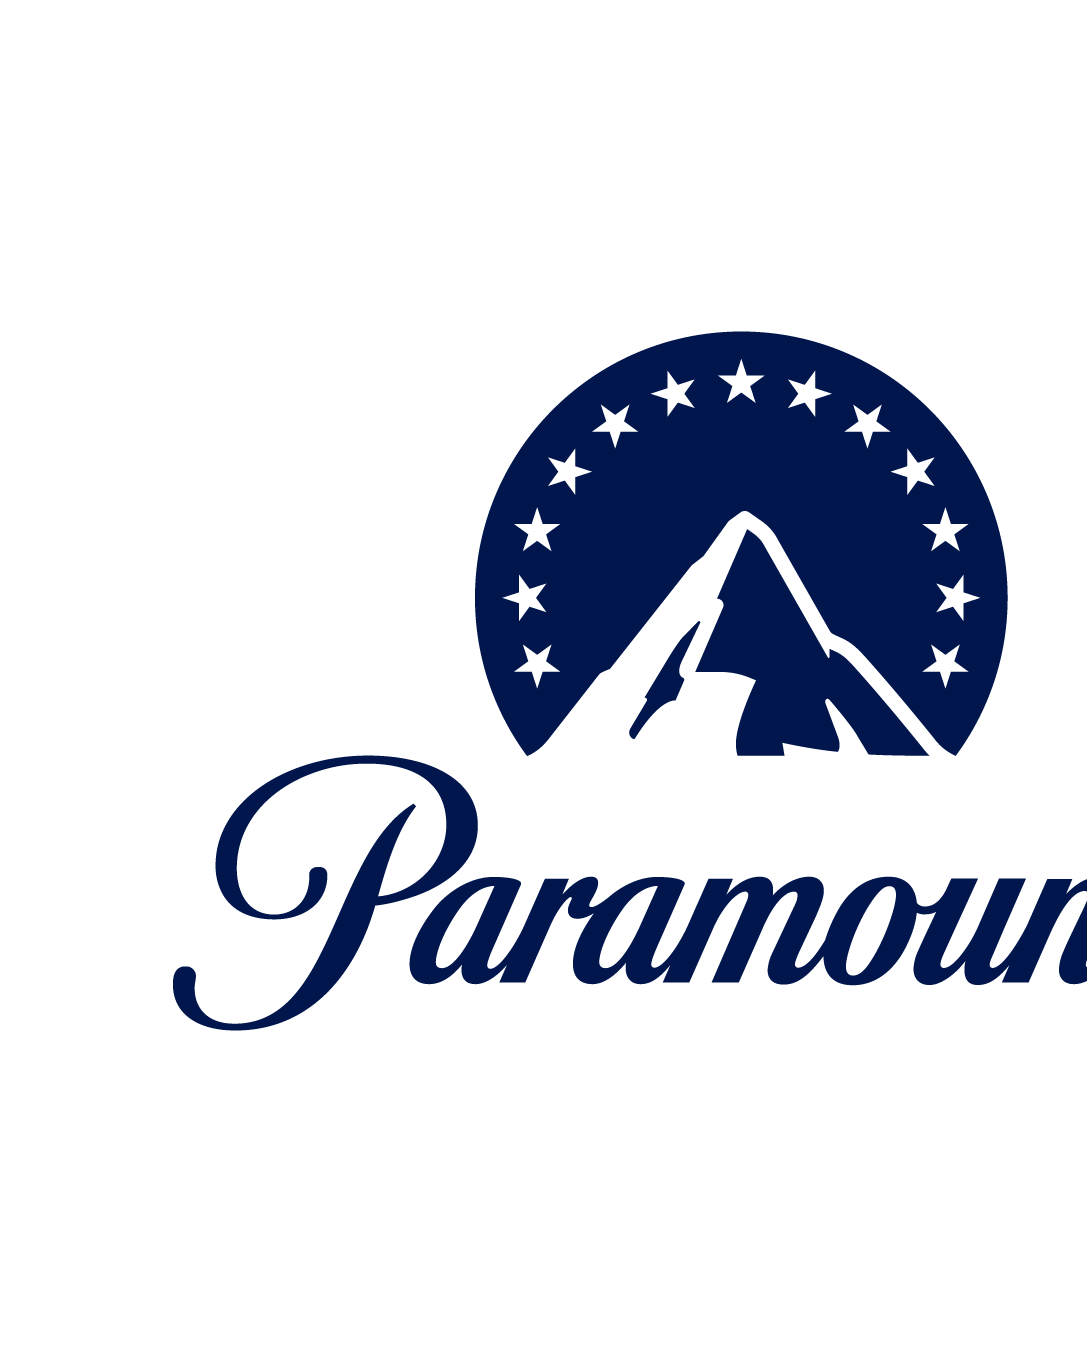 Paramount Consumer Products